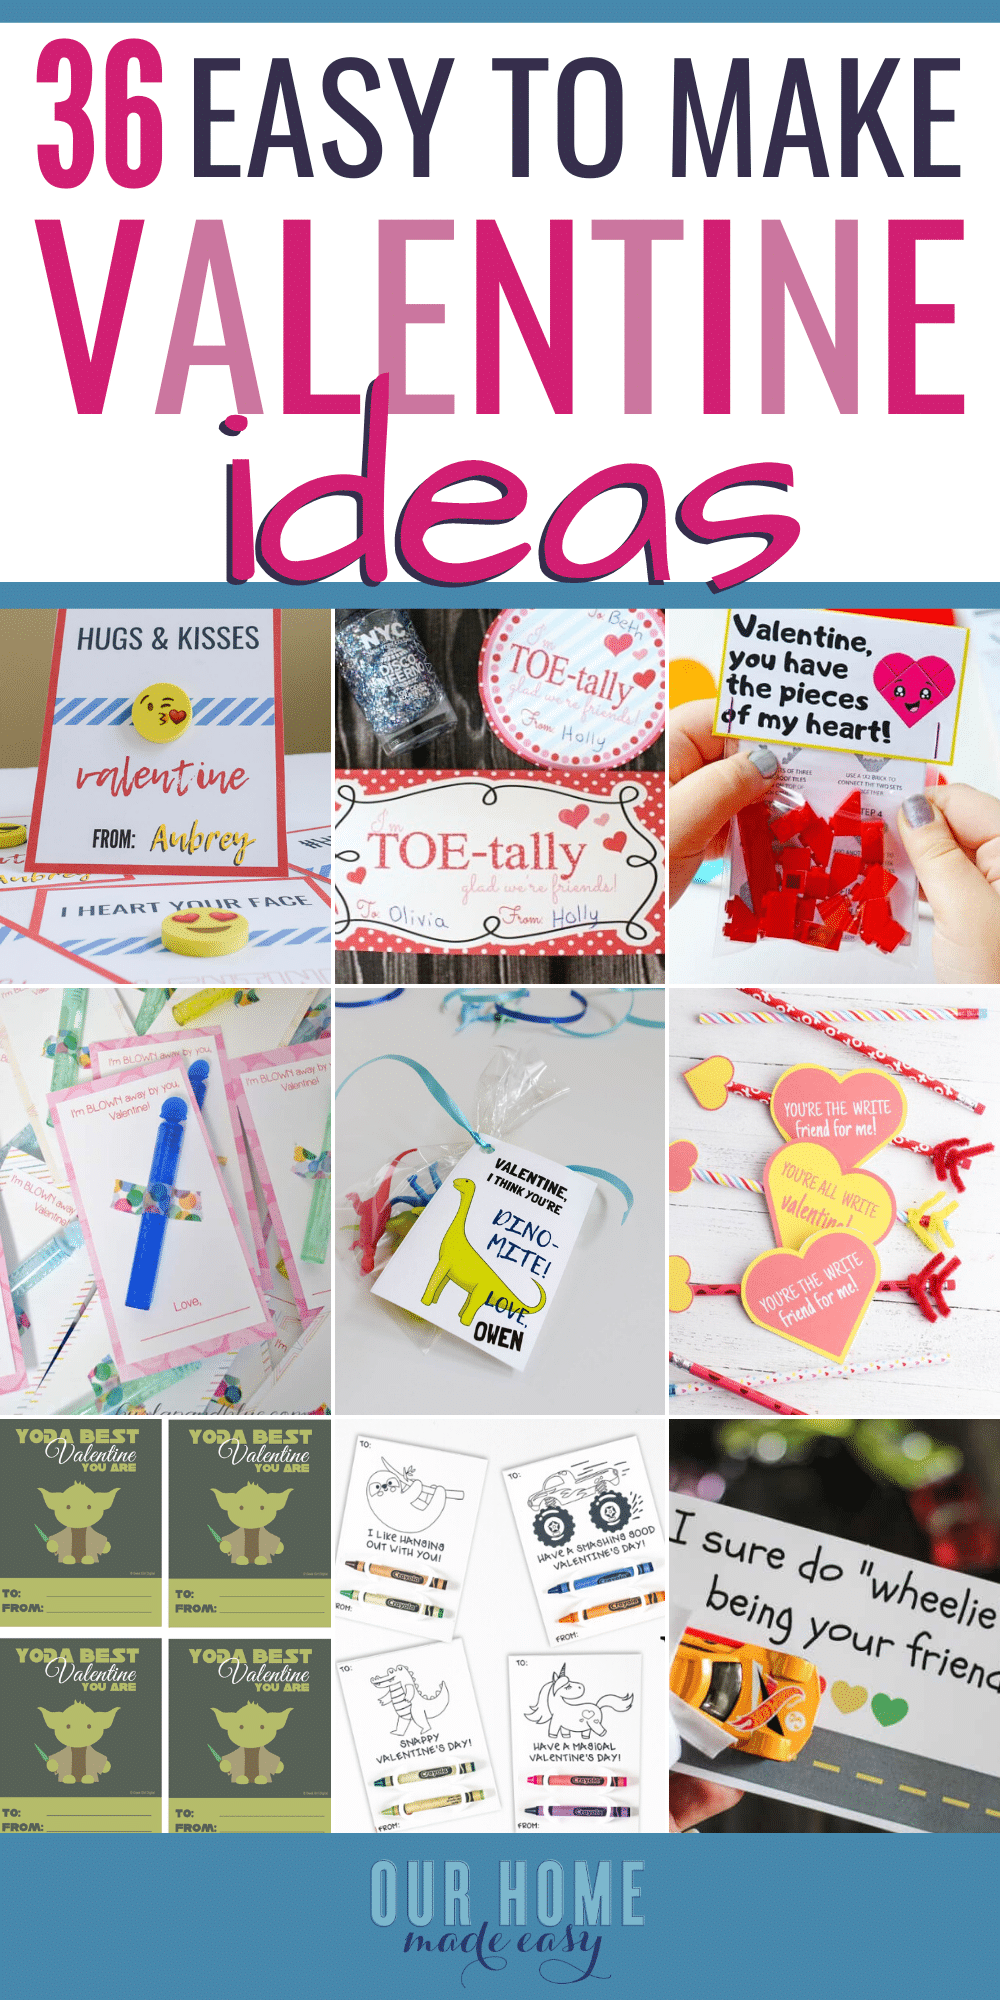 36 Easy to Make Kids Valentines for School - great ideas that don't include candy